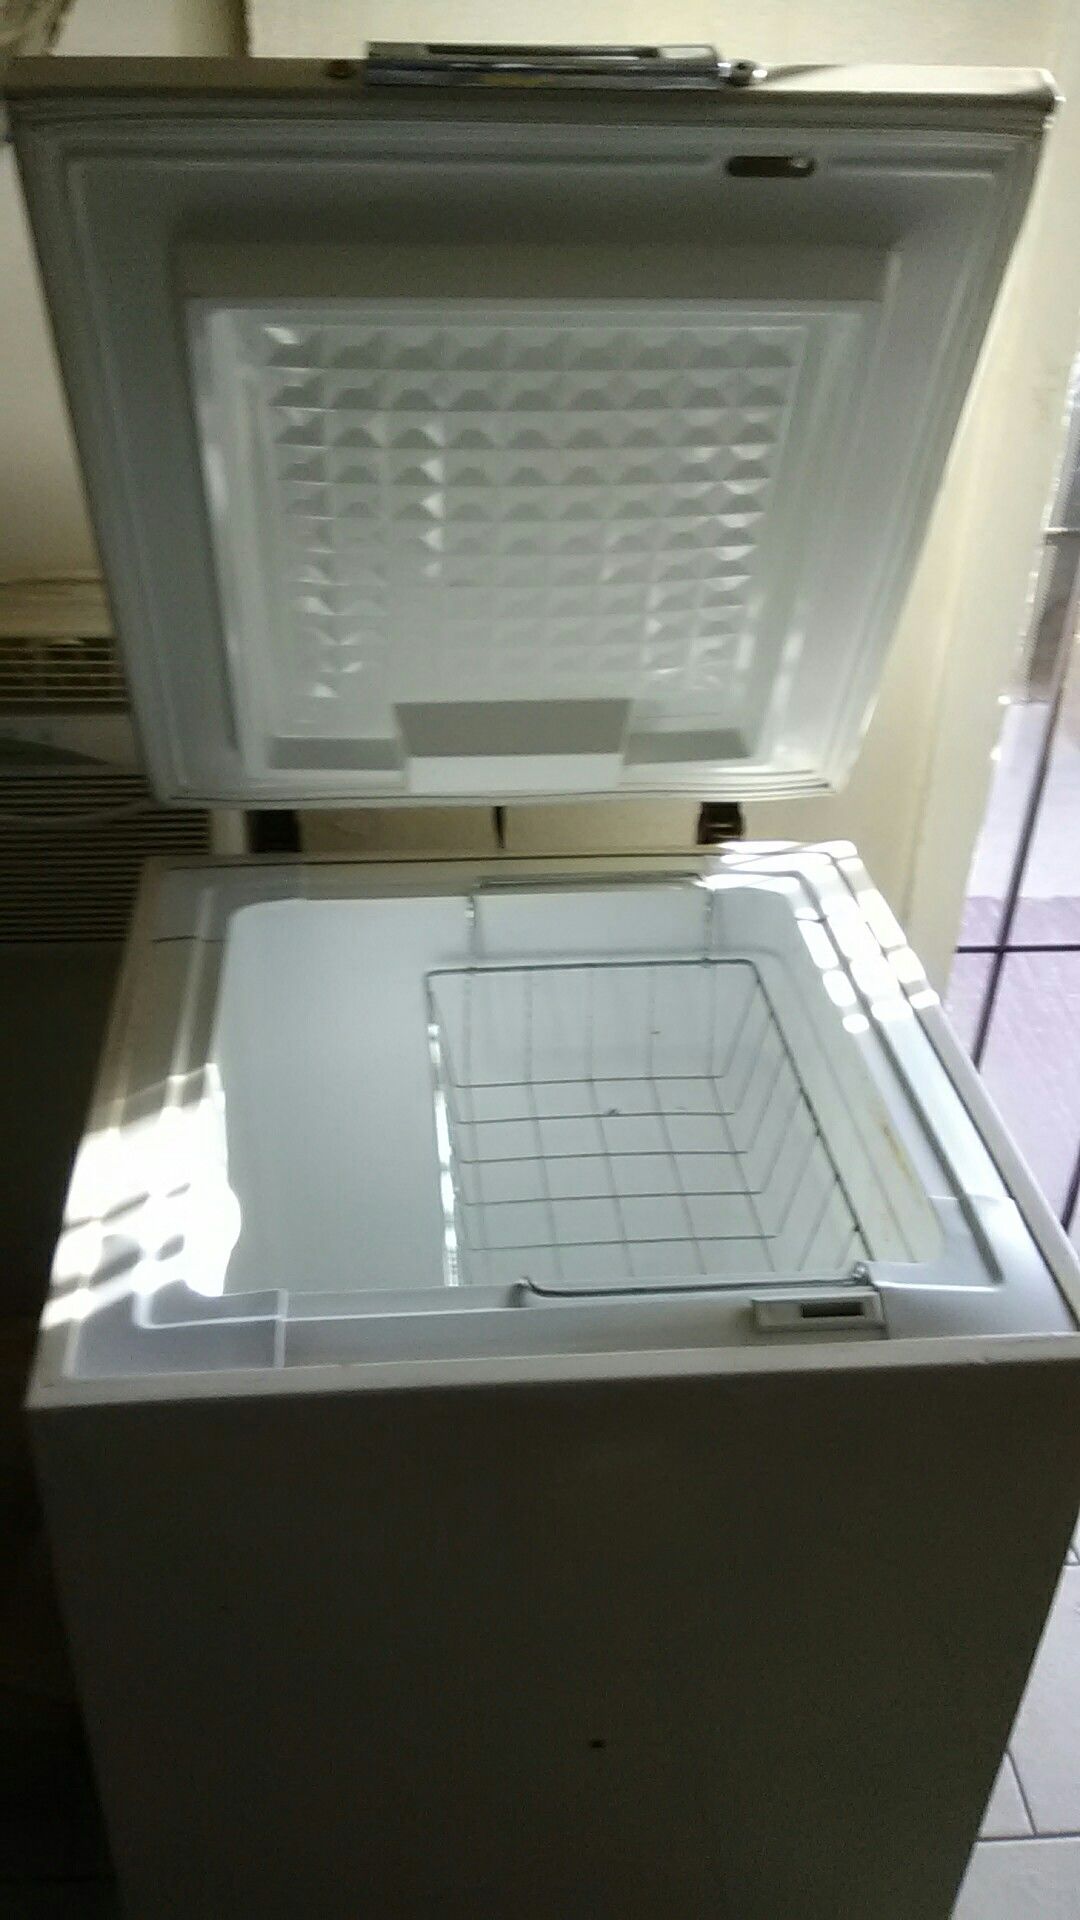 Small-size freezer good condition